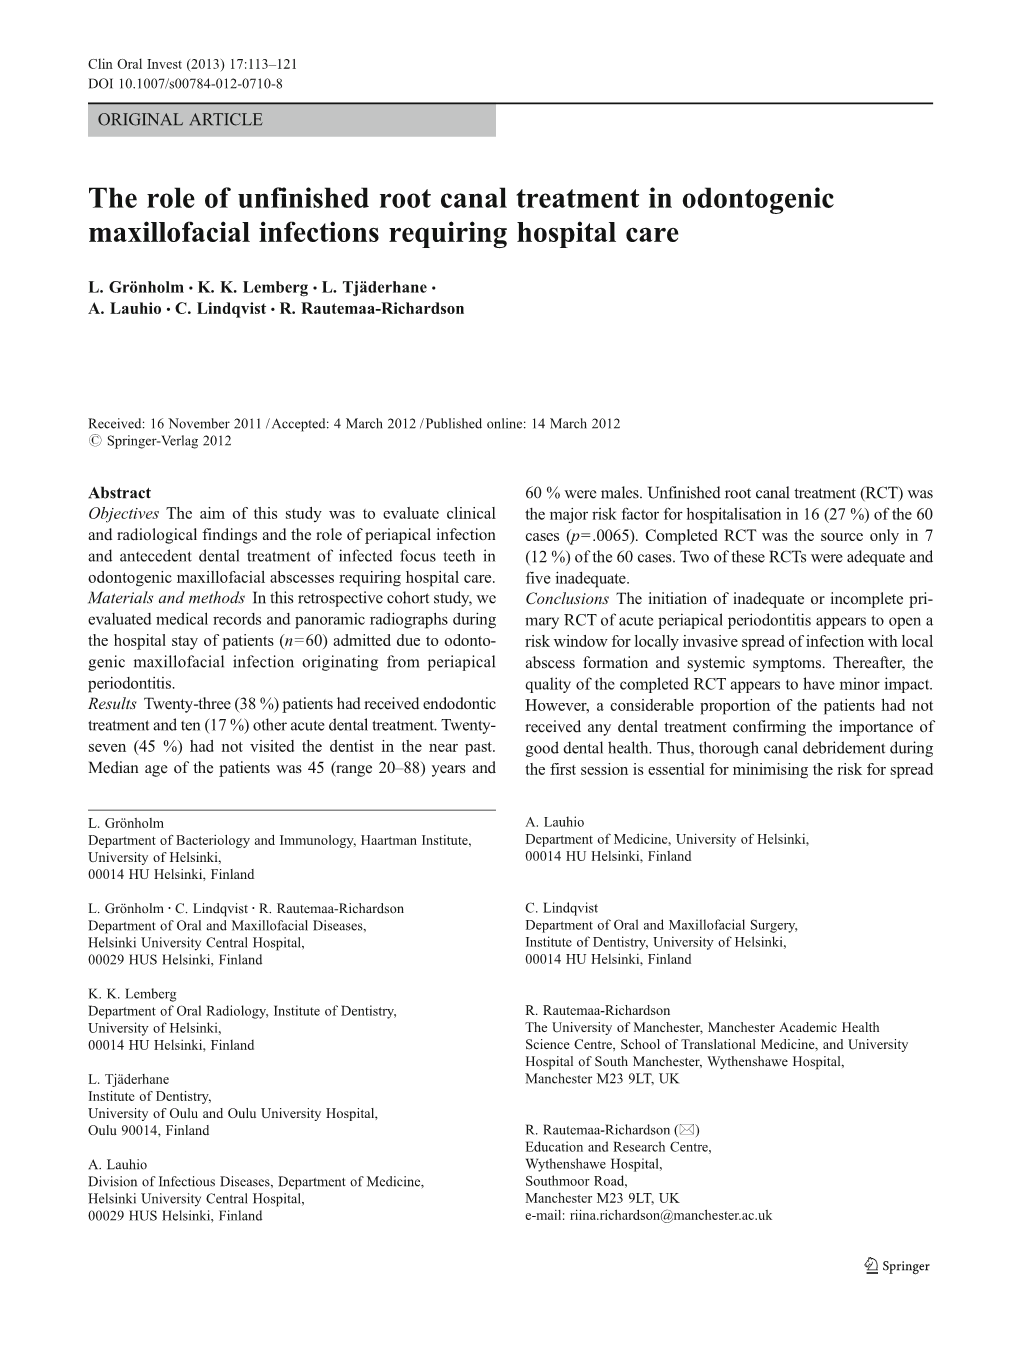 The Role of Unfinished Root Canal Treatment in Odontogenic Maxillofacial Infections Requiring Hospital Care